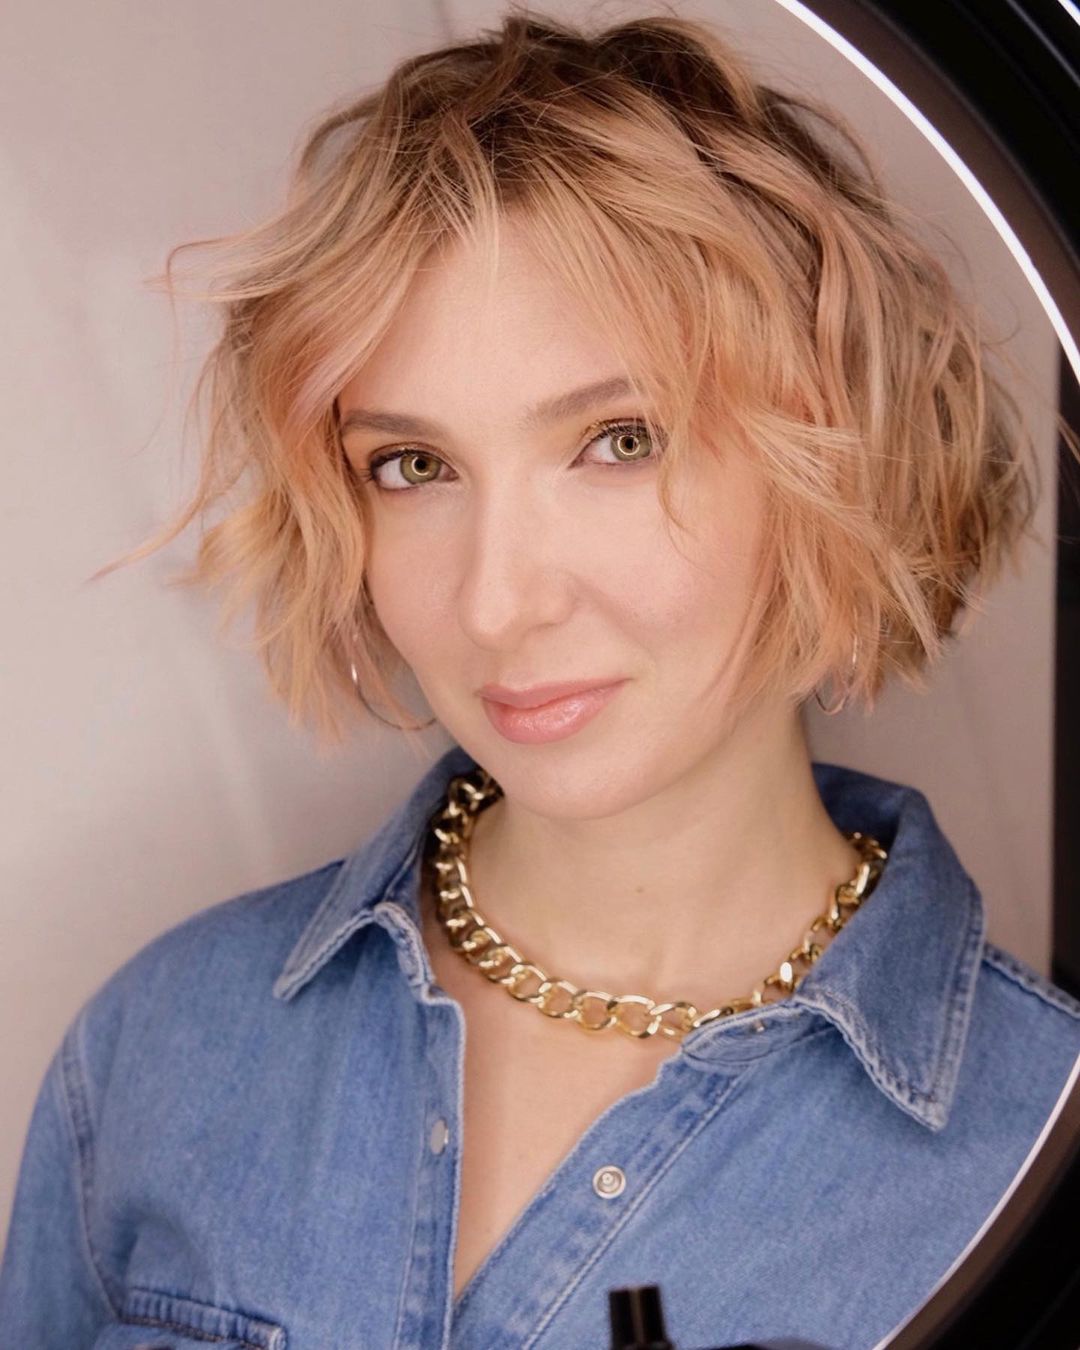 Short haircuts for curly hair: 16 fashion ideas for a playful look